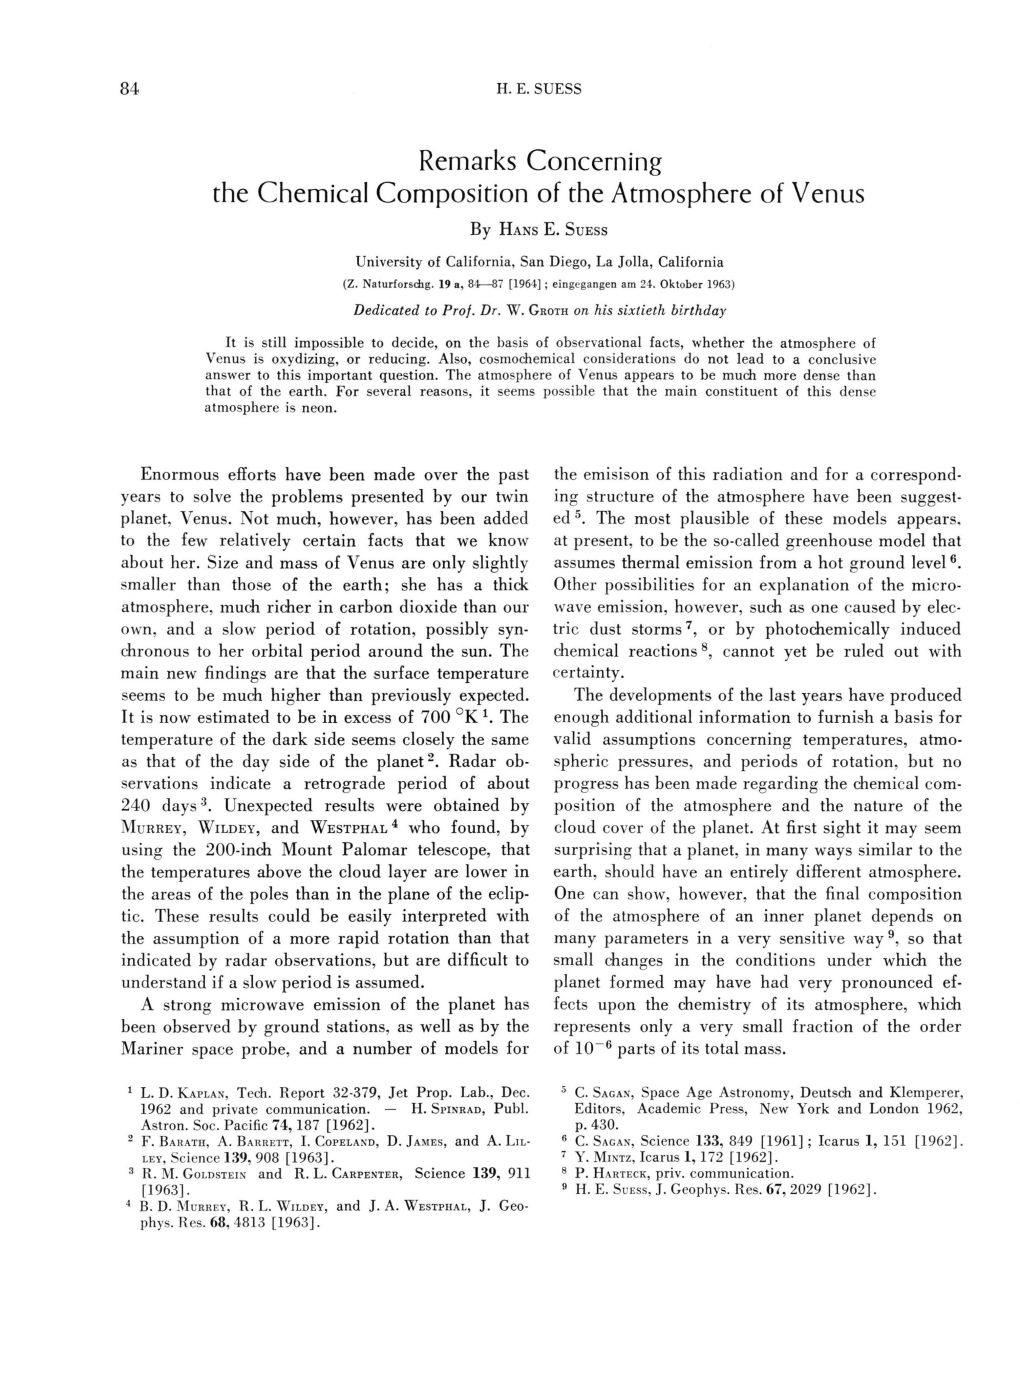 Remarks Concerning the Chemical Composition of the Atmosphere of Venus